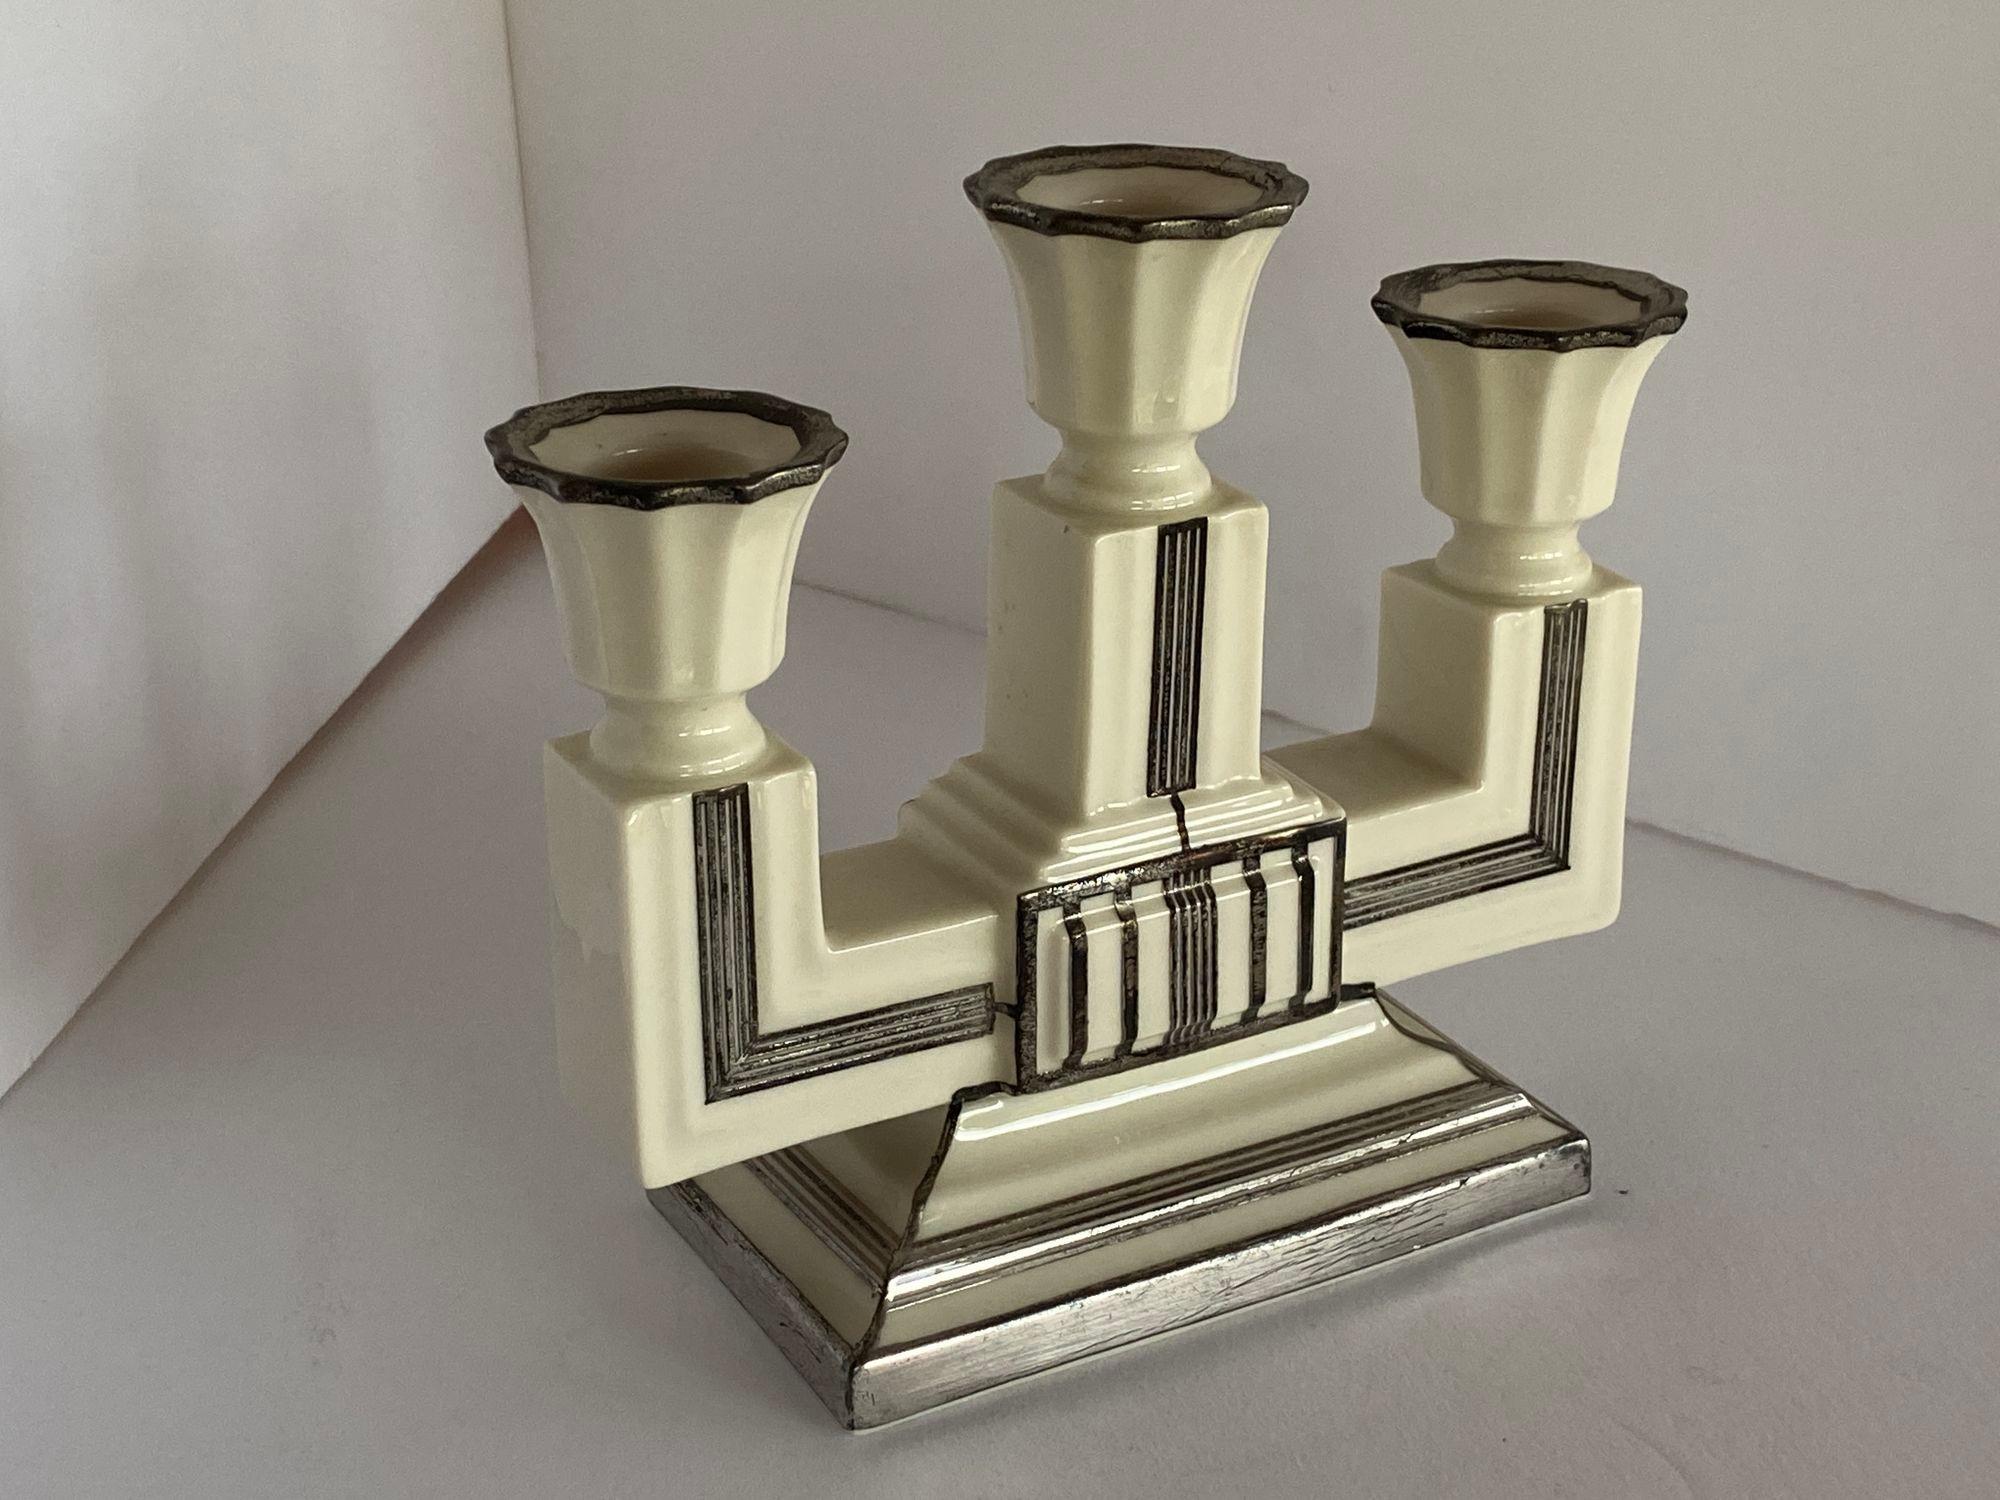 Stepped Art Deco ceramic candelabra with sterling silver overlay by Lenox.

Circa 1930.